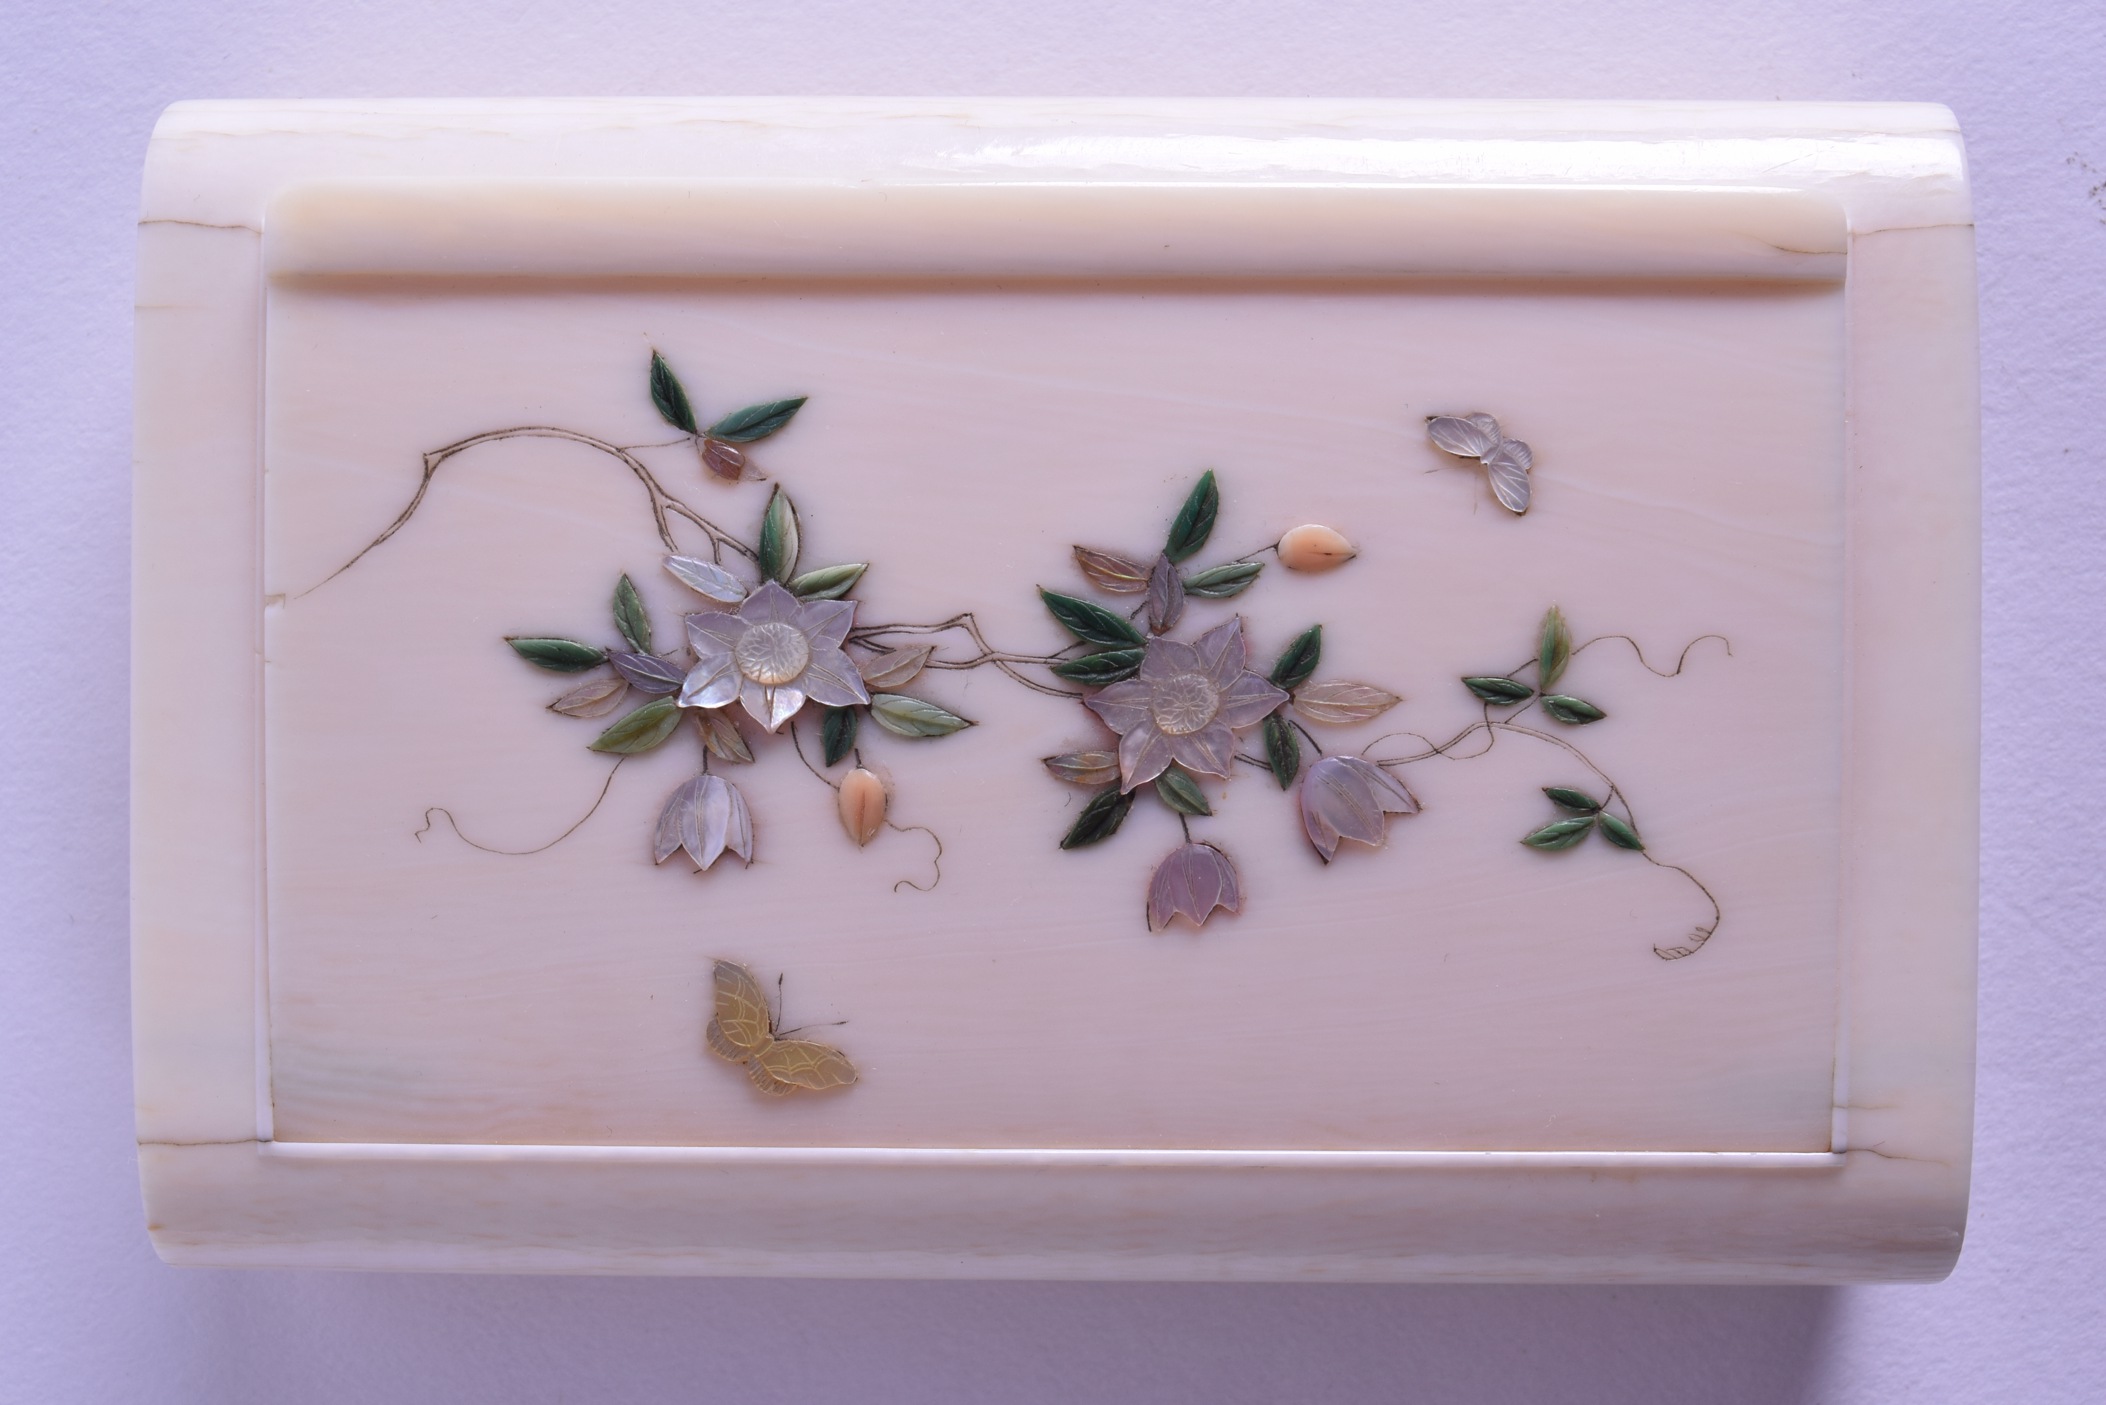 A LATE 19TH CENTURY JAPANESE MEIJI PERIOD CARVED IVORY BOX AND COVER shibayama inlaid with floral - Image 4 of 4